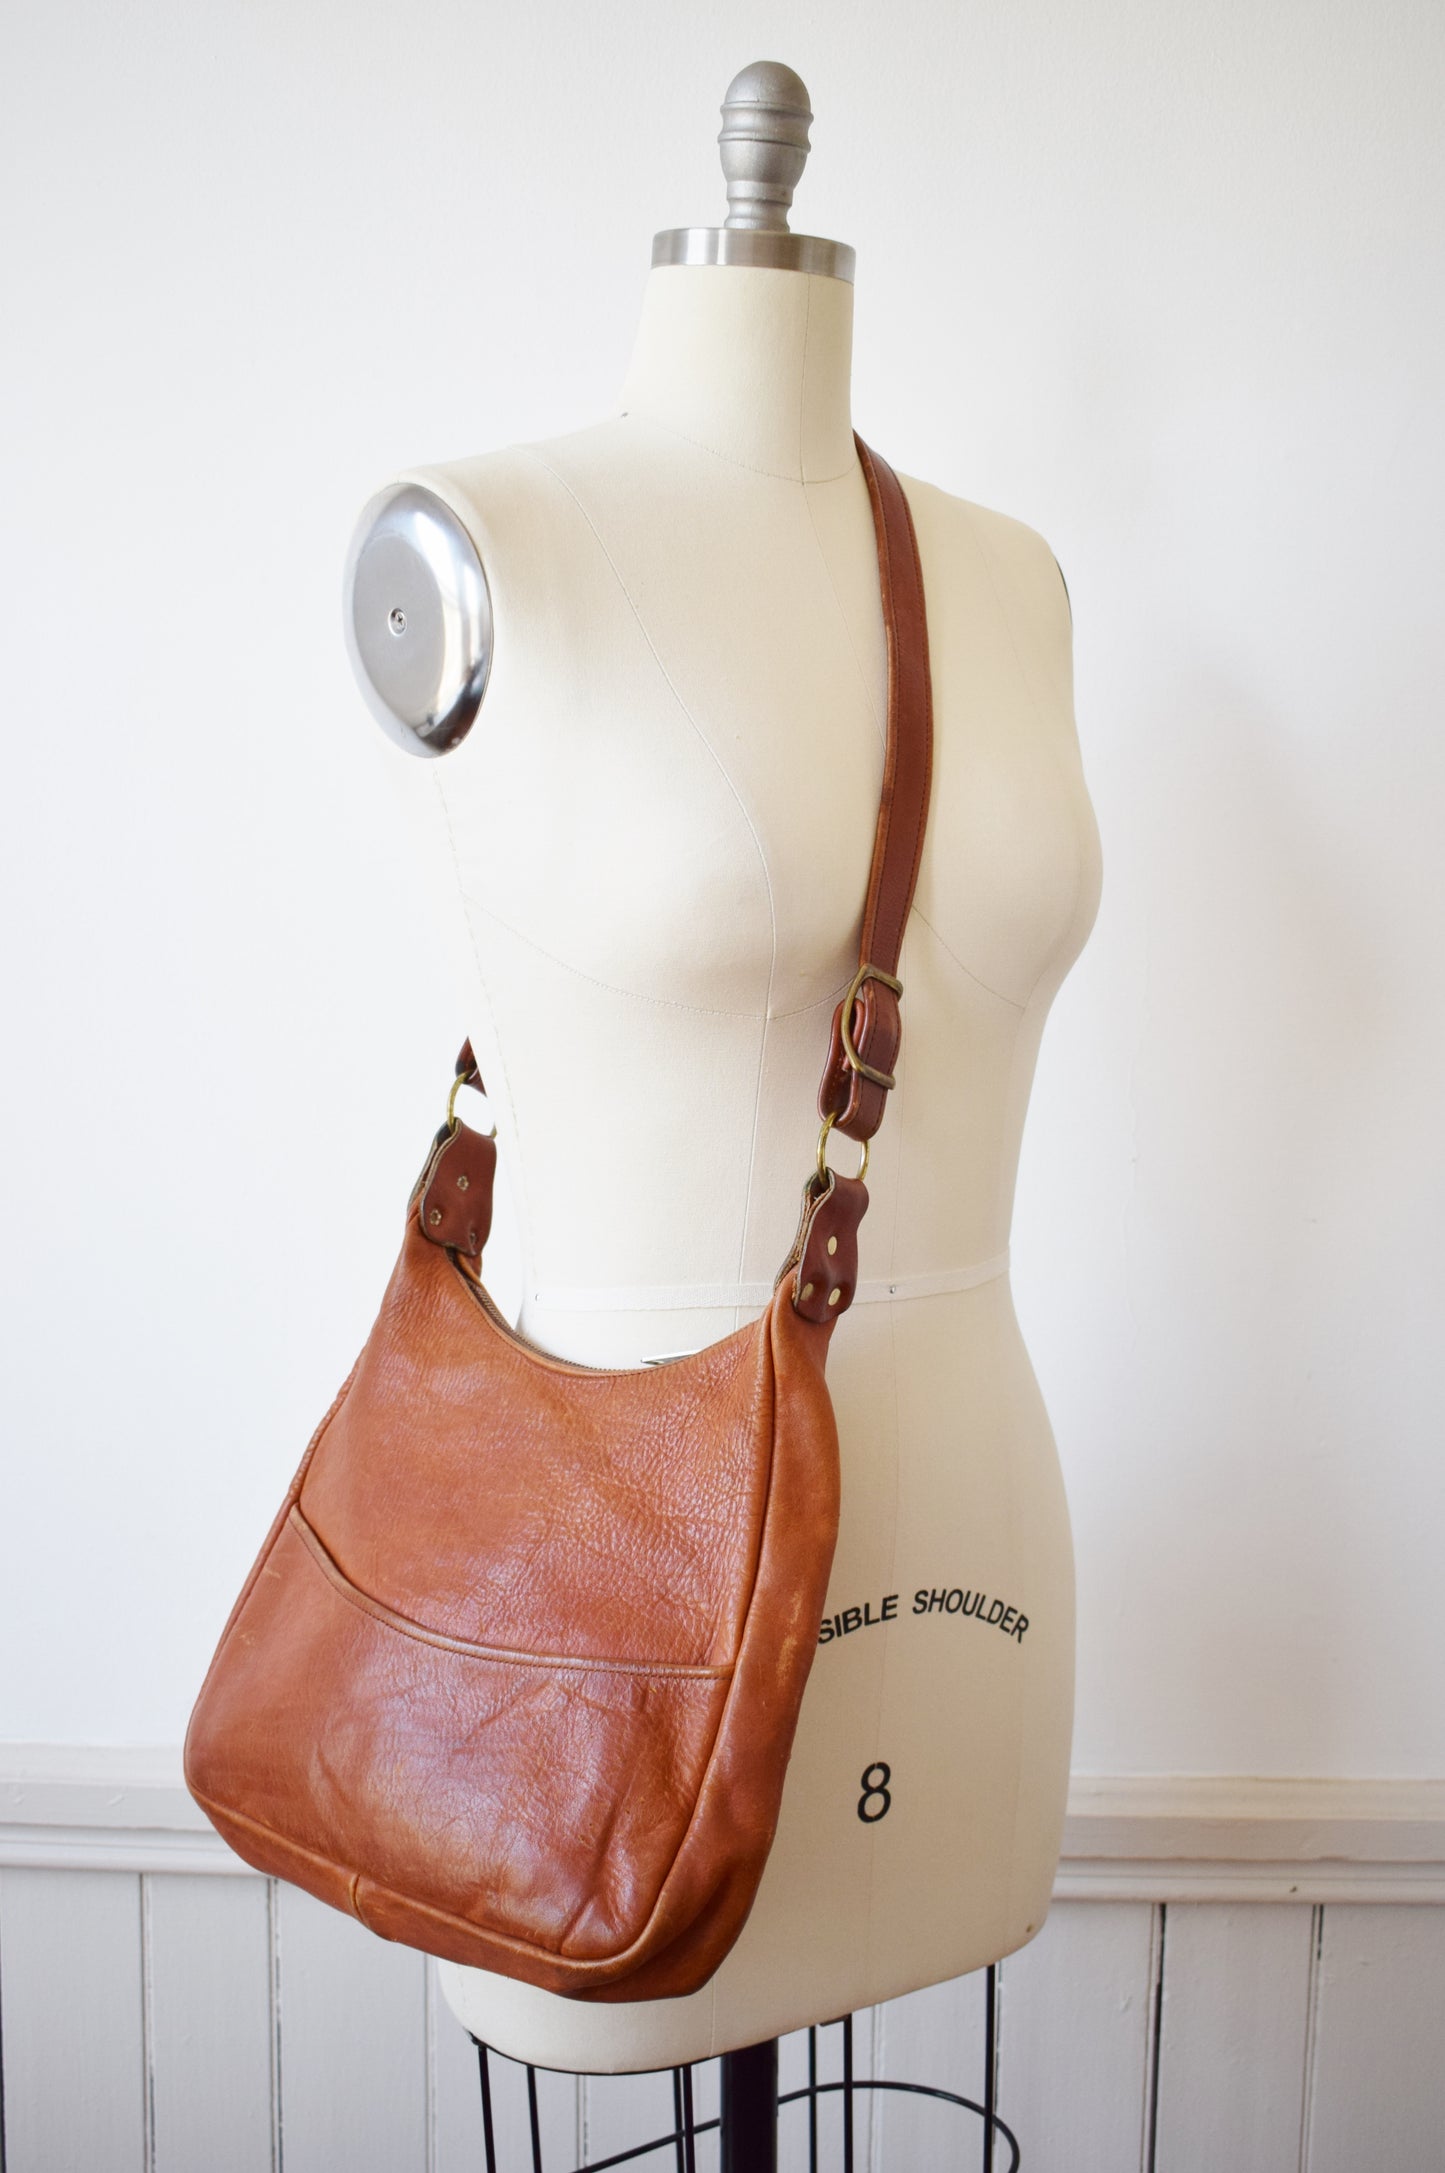 1970s Distressed Leather Purse